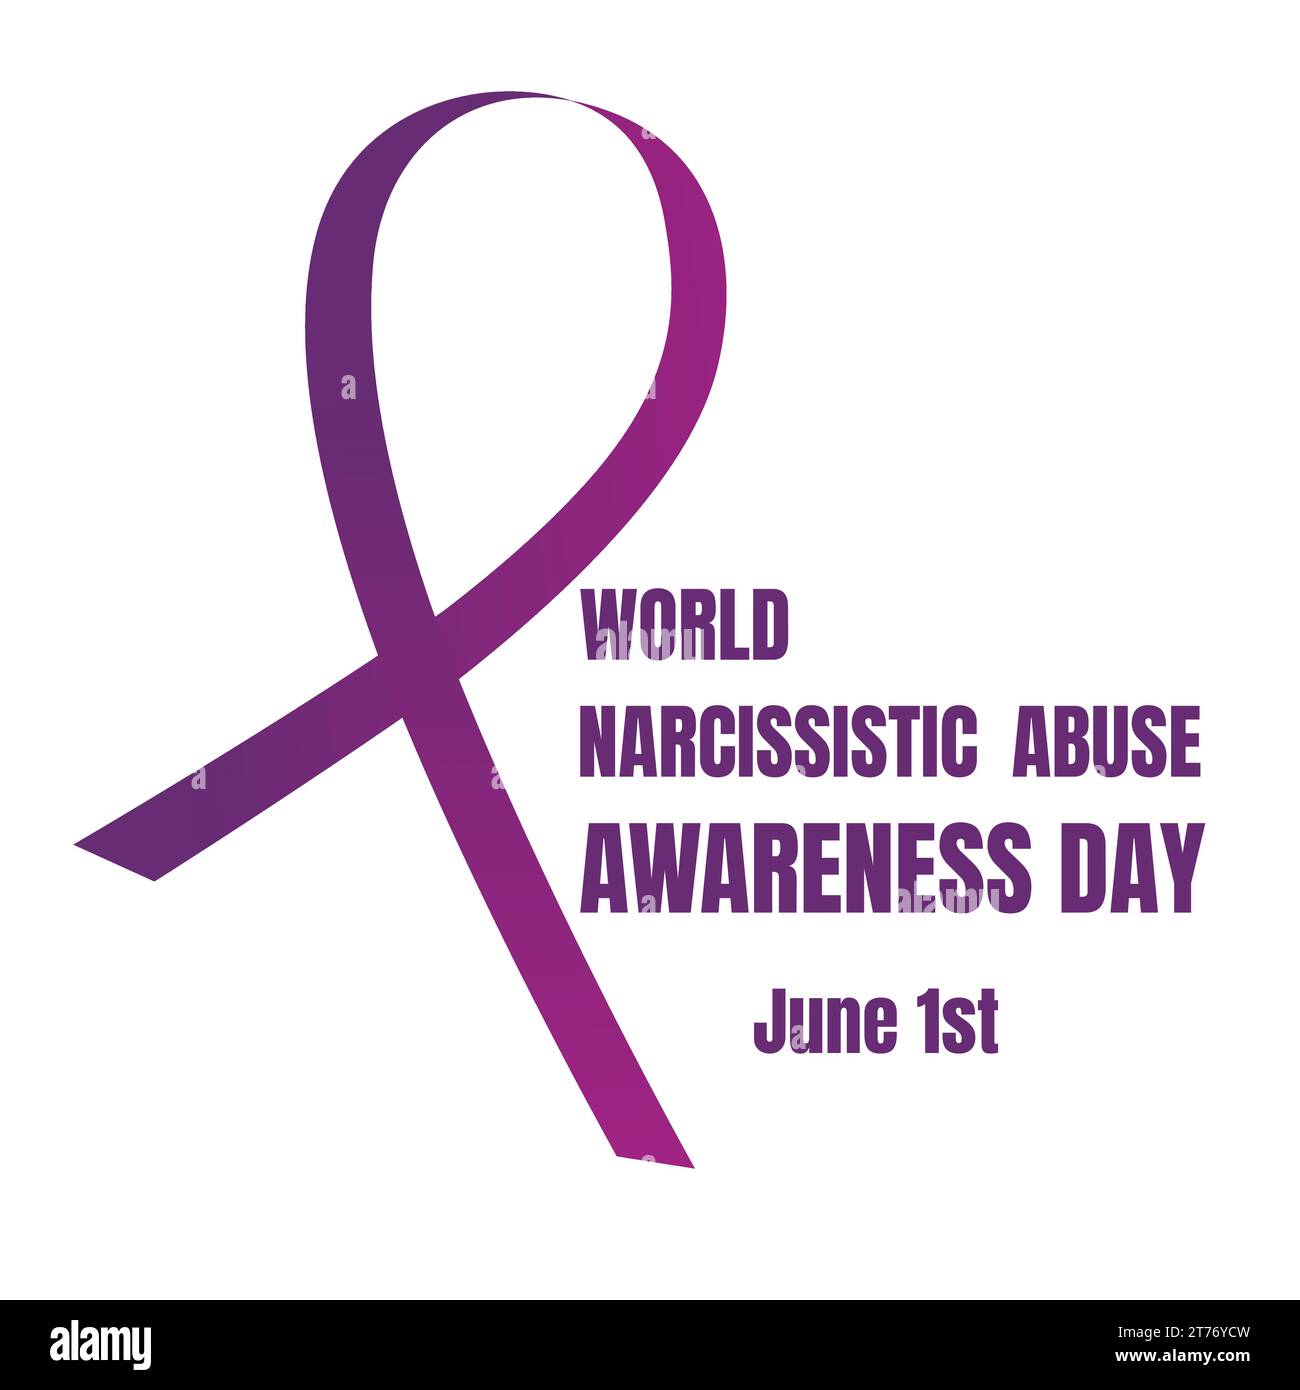 Card purple ribbon and textWorld Narcissistic Abuse Awareness Day isolated on white background. An event for people affected by narcissistic violence Stock Vector